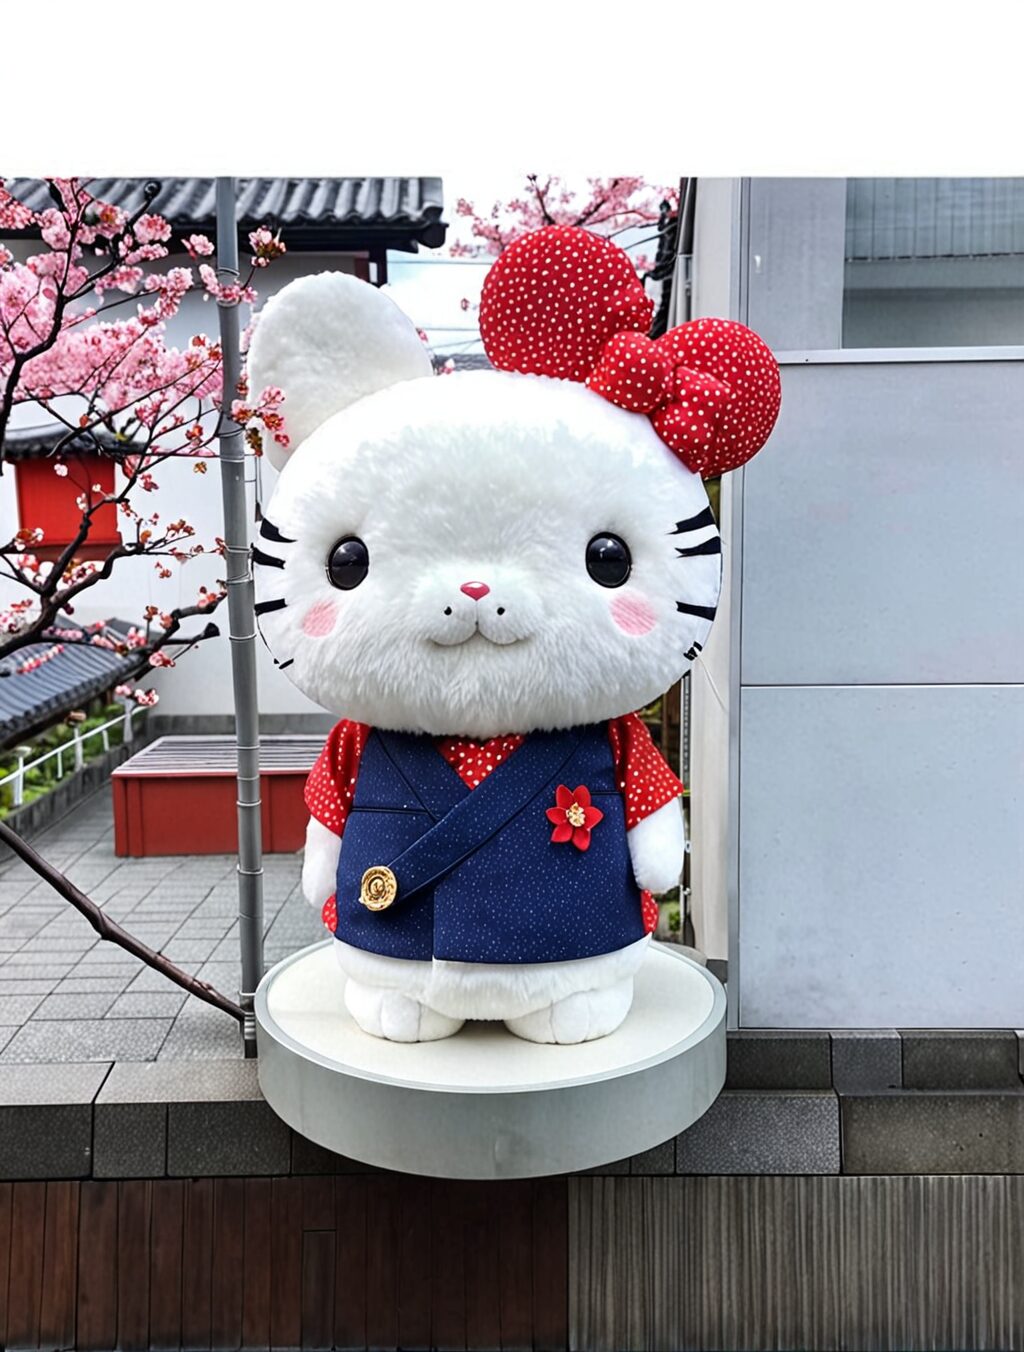 why is everything in japan so cute